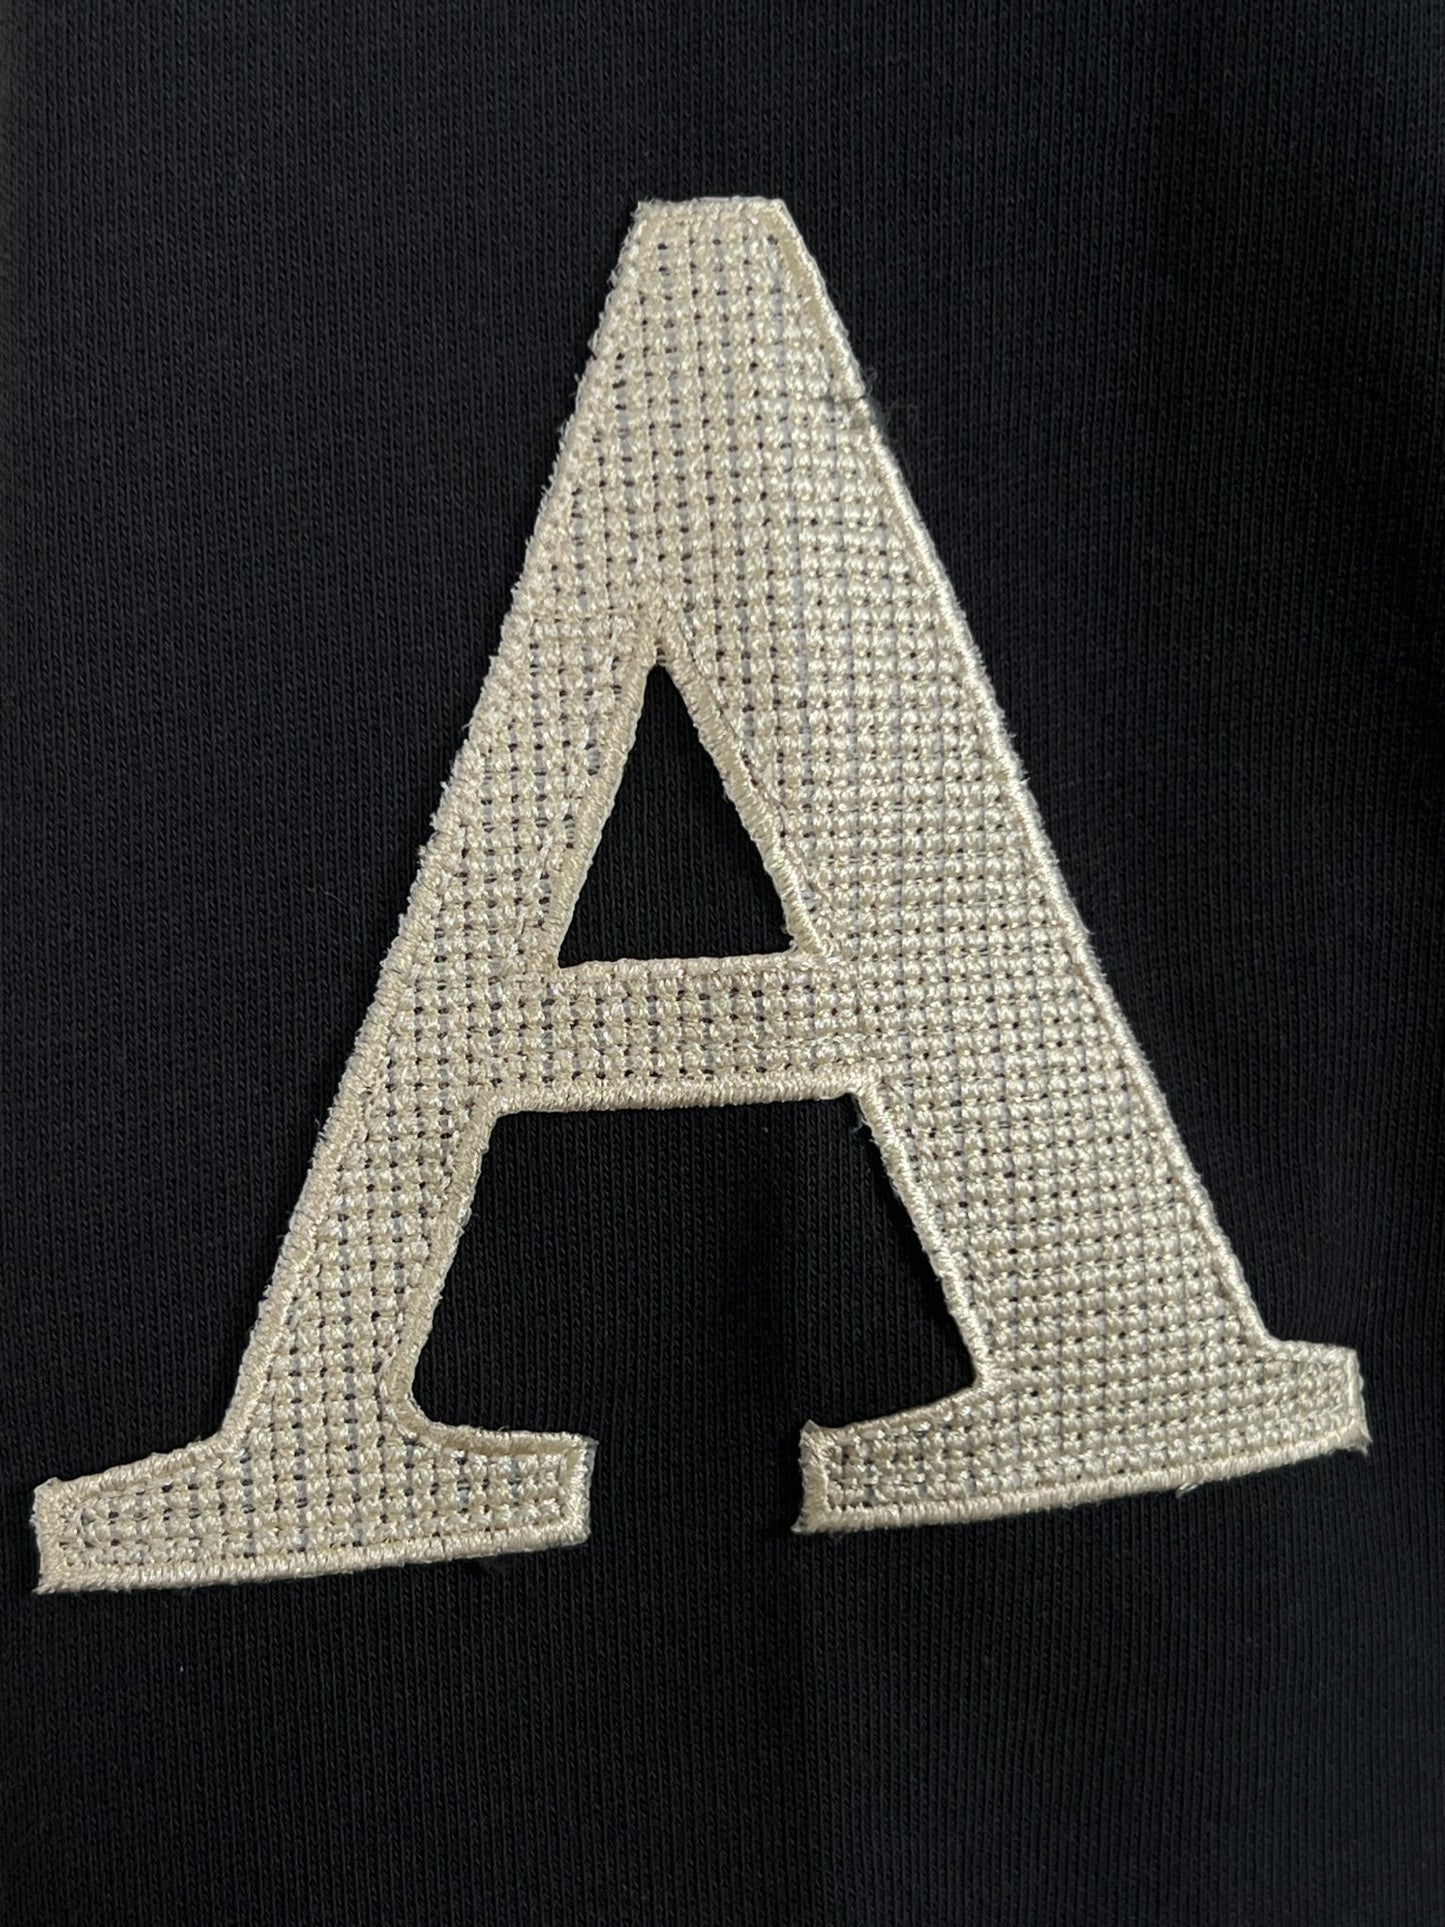 Embroidered AL AIN letter 'a' on a black 100% Cotton fabric background.